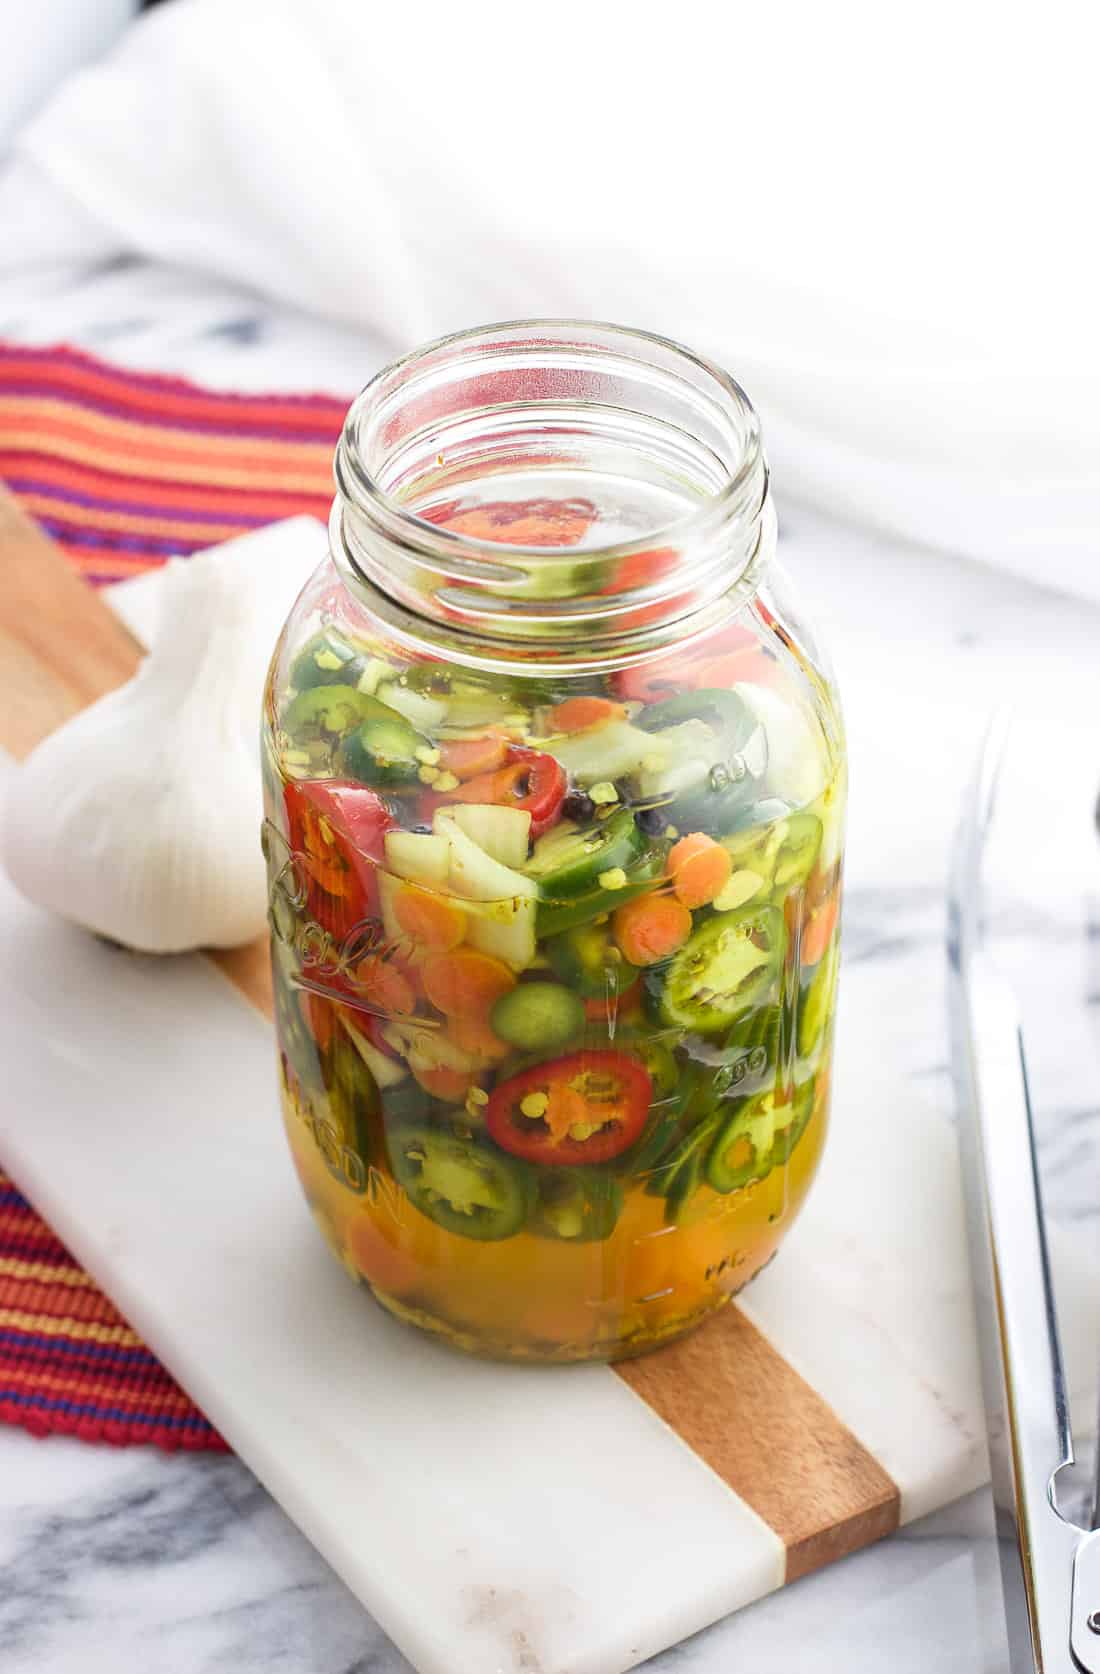 A Ball glass jar filled with the refrigerator pickled peppers